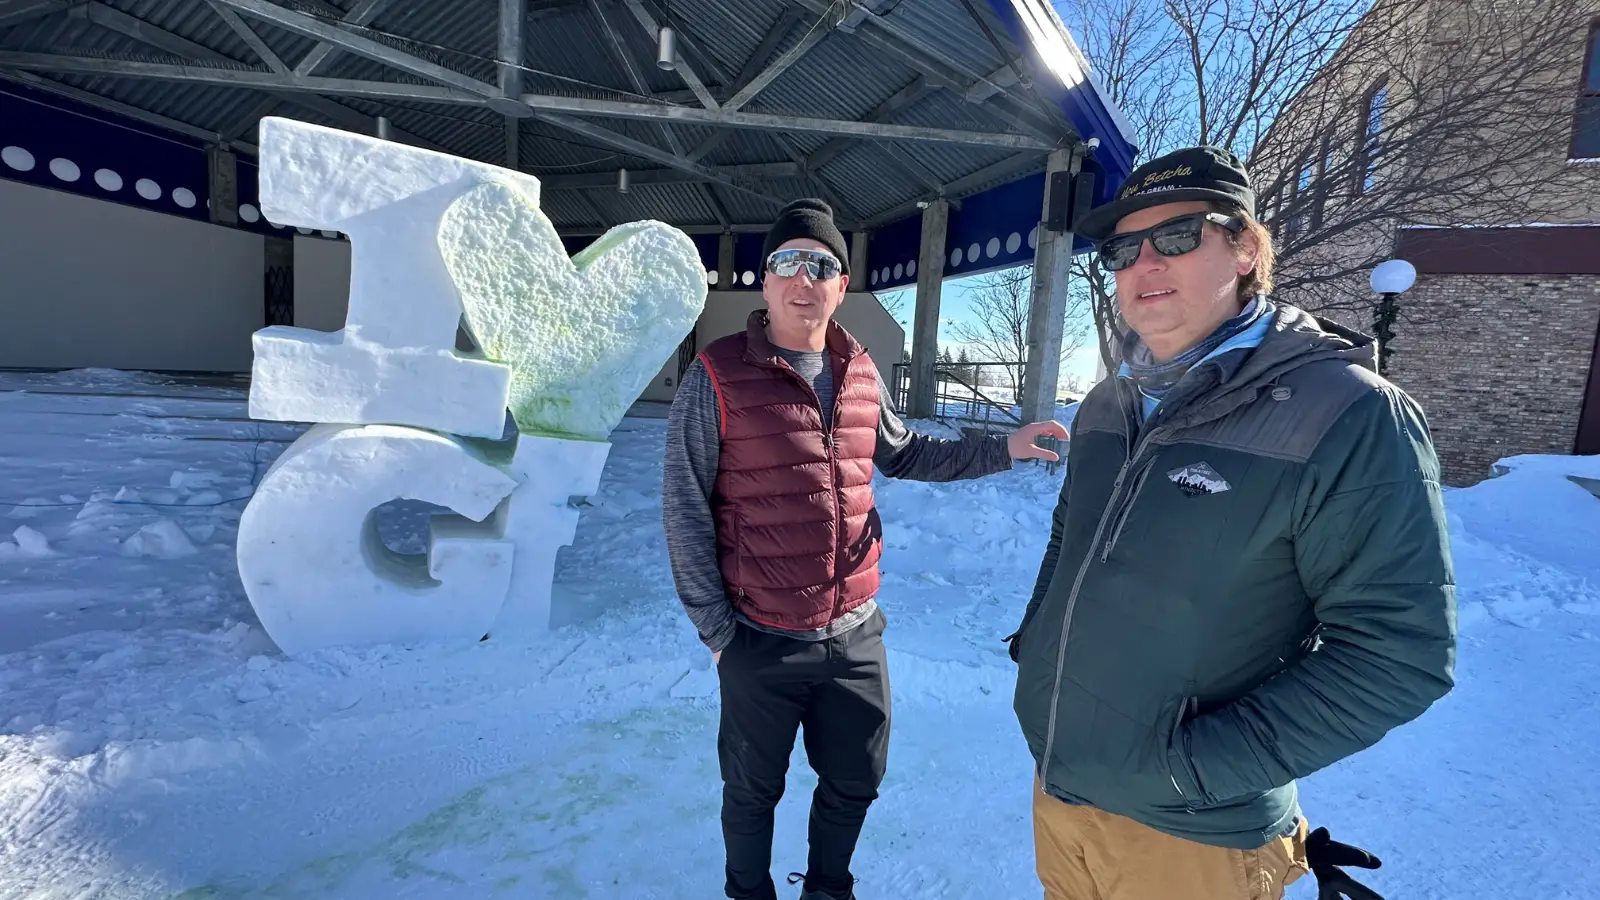 Grand Forks Author Paul stands with friend in Townsquare next to ice sculpture that reads "I Love Grand Forks"